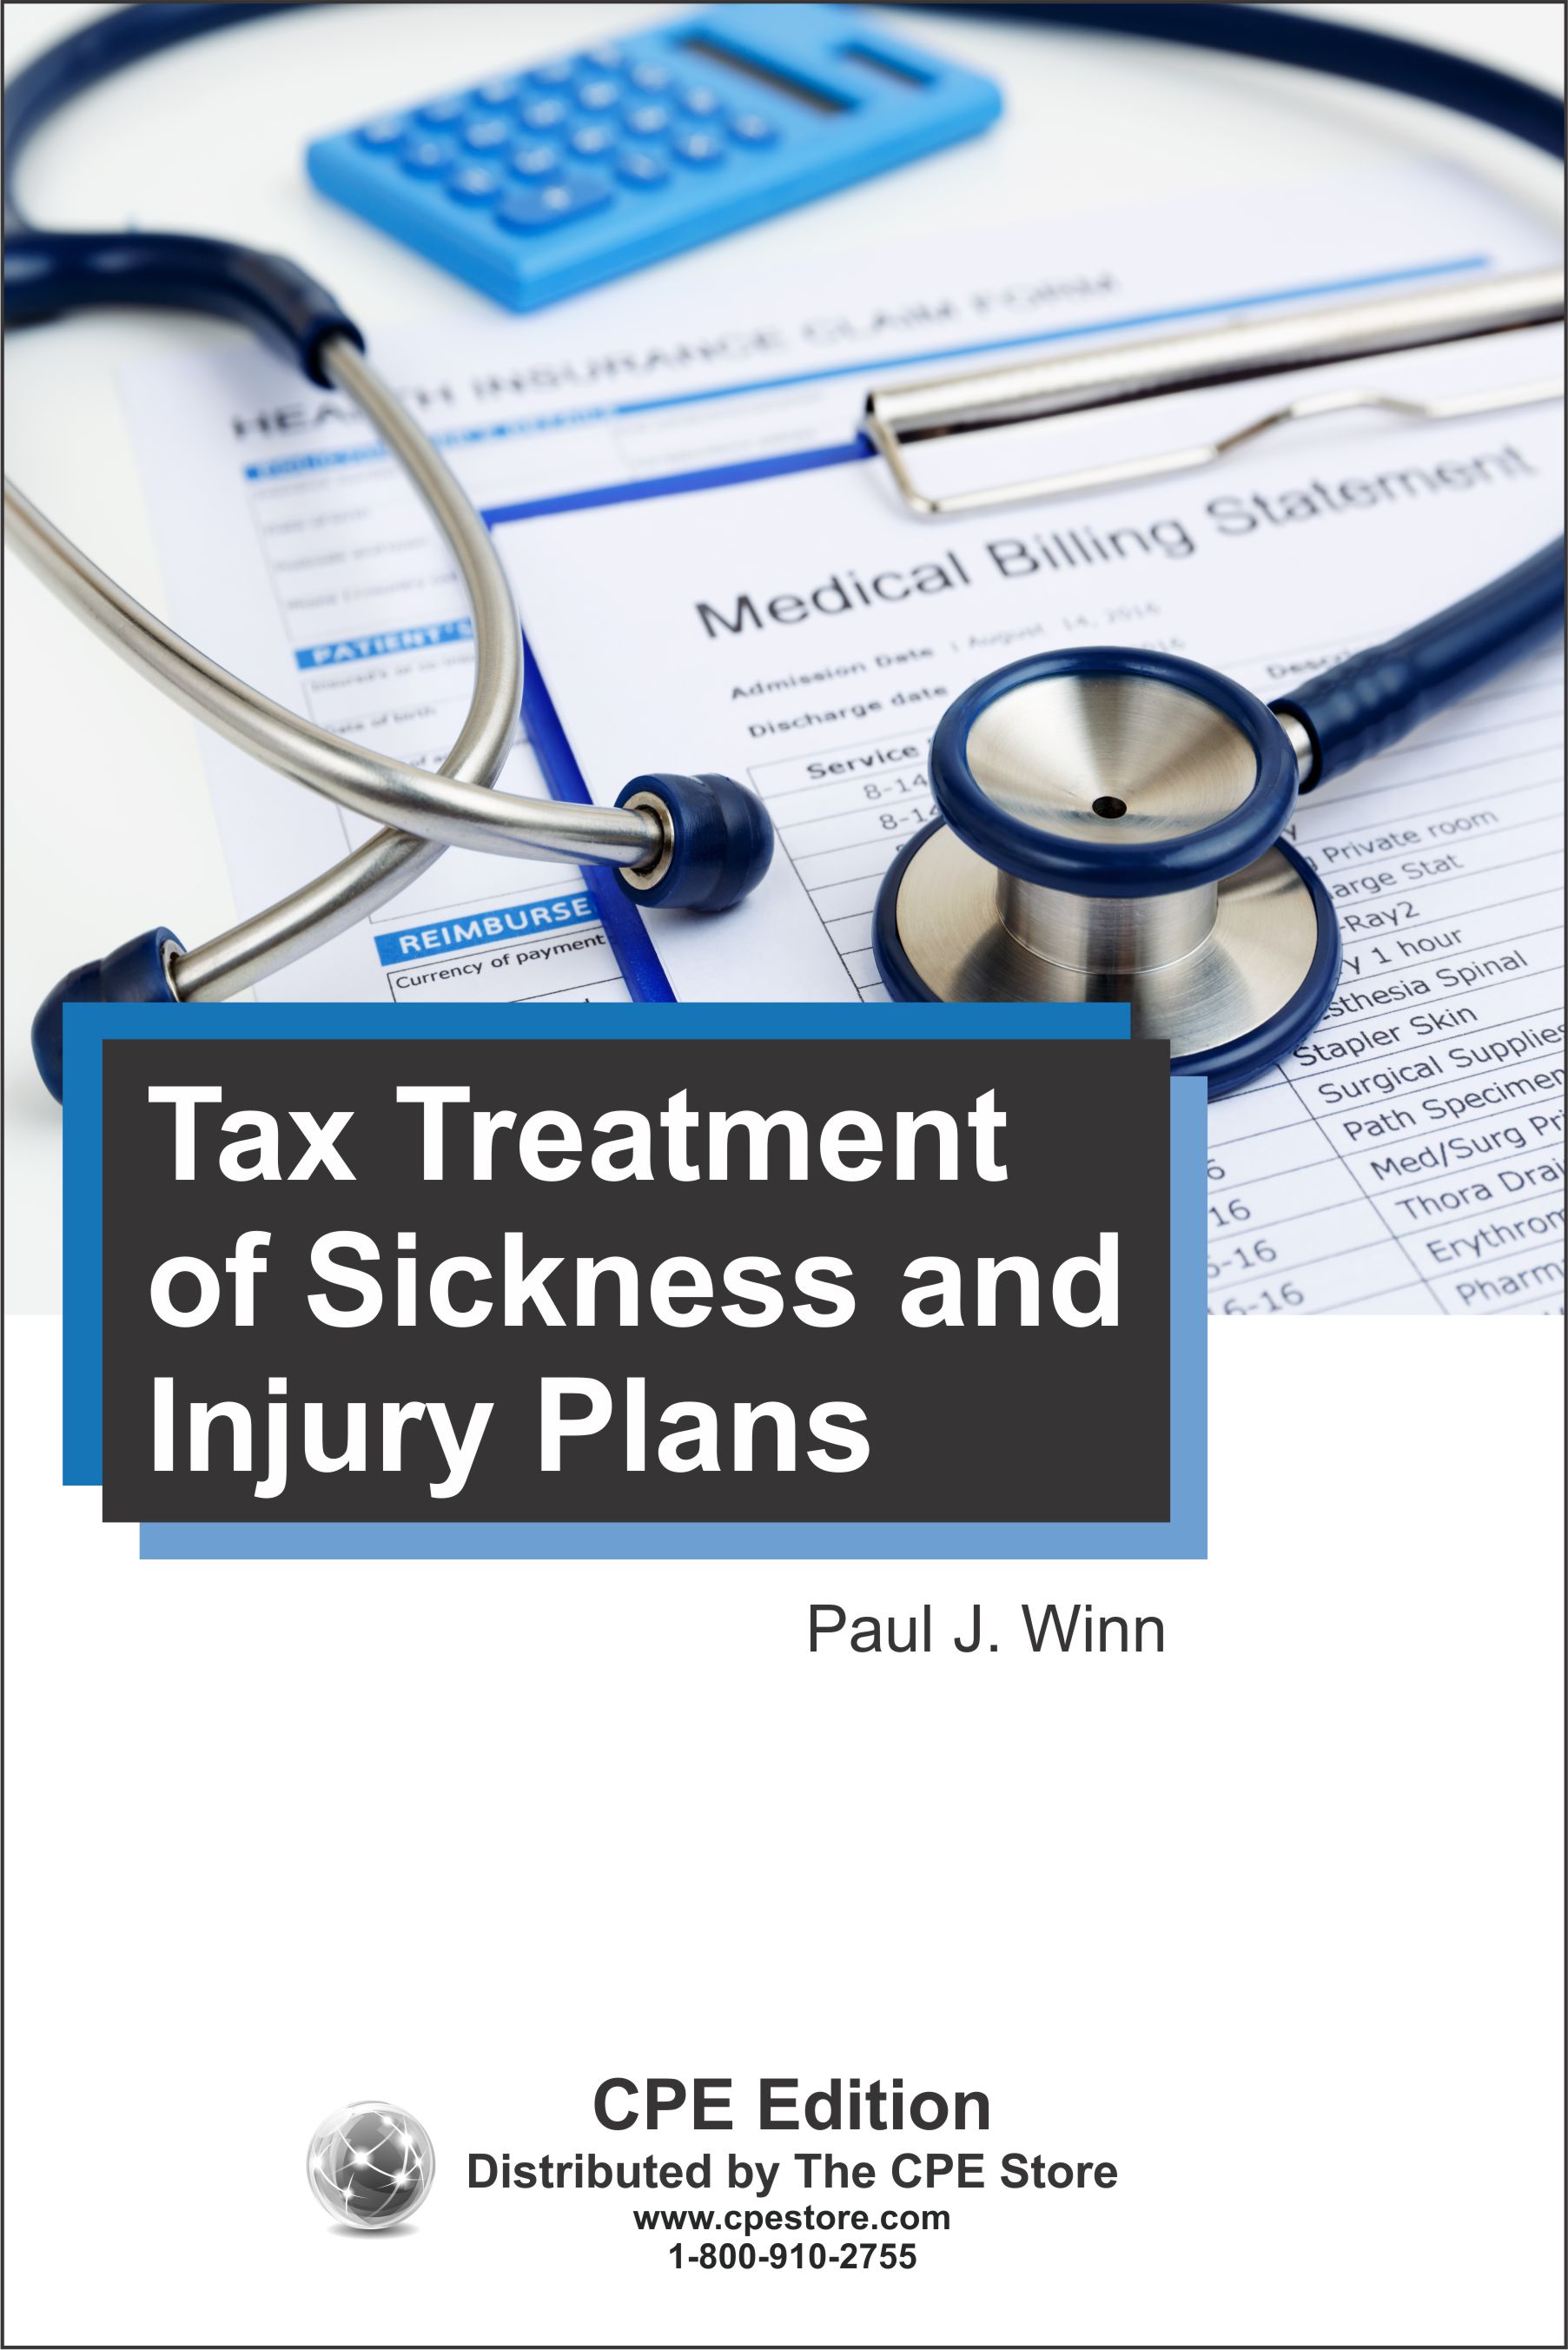 Tax Treatment of Sickness and Injury Plans